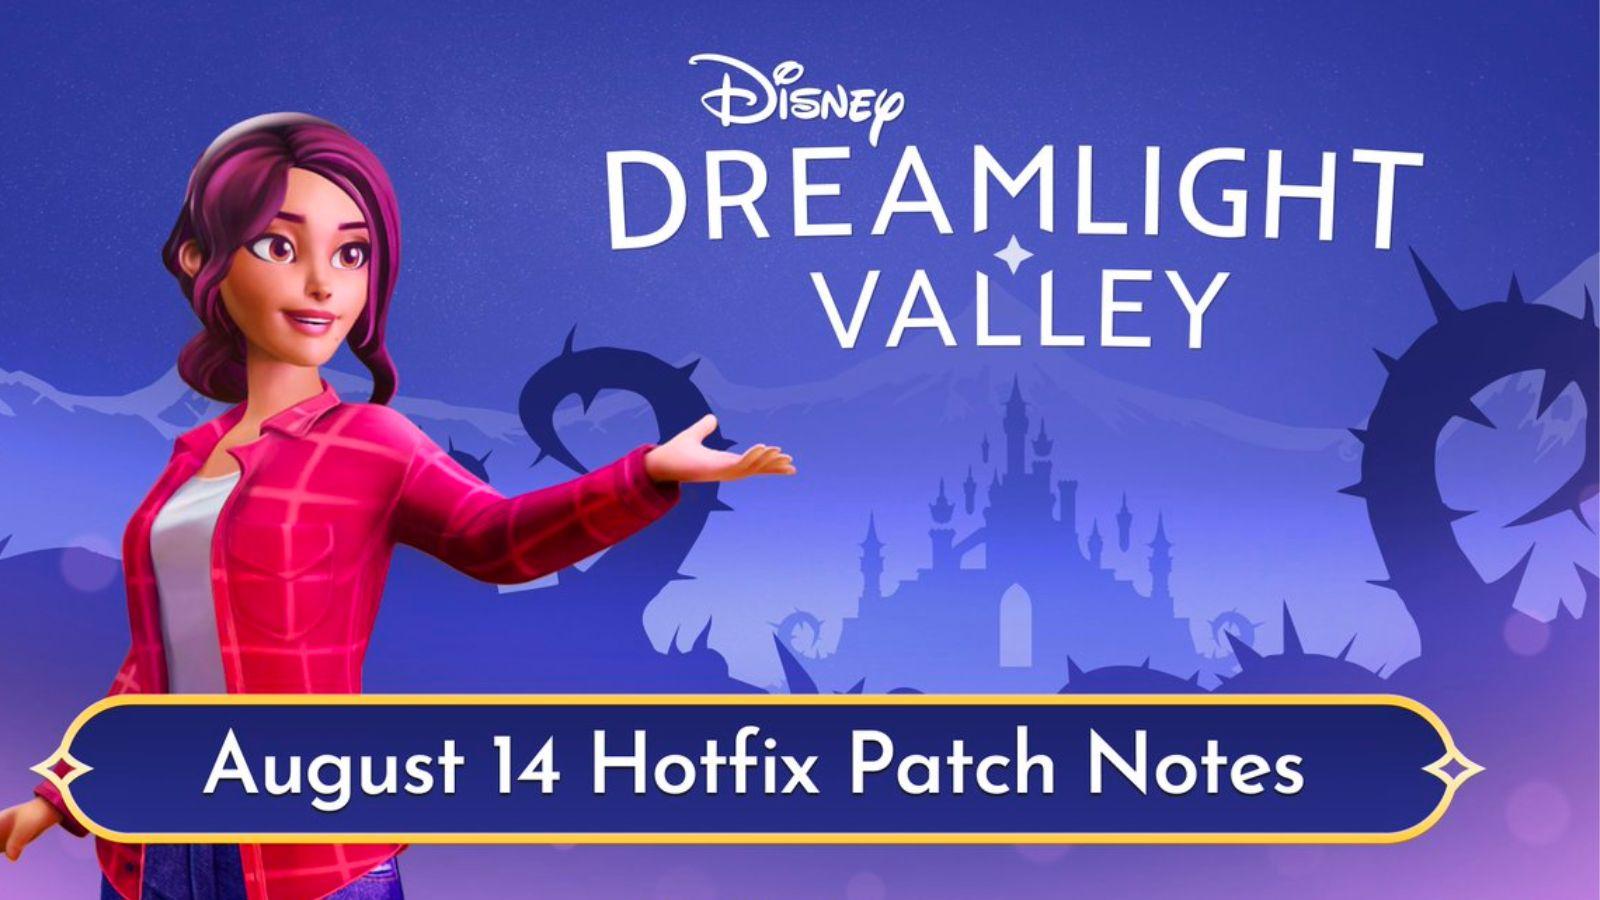 Disney Dreamlight Valley launches August 14 hotfix